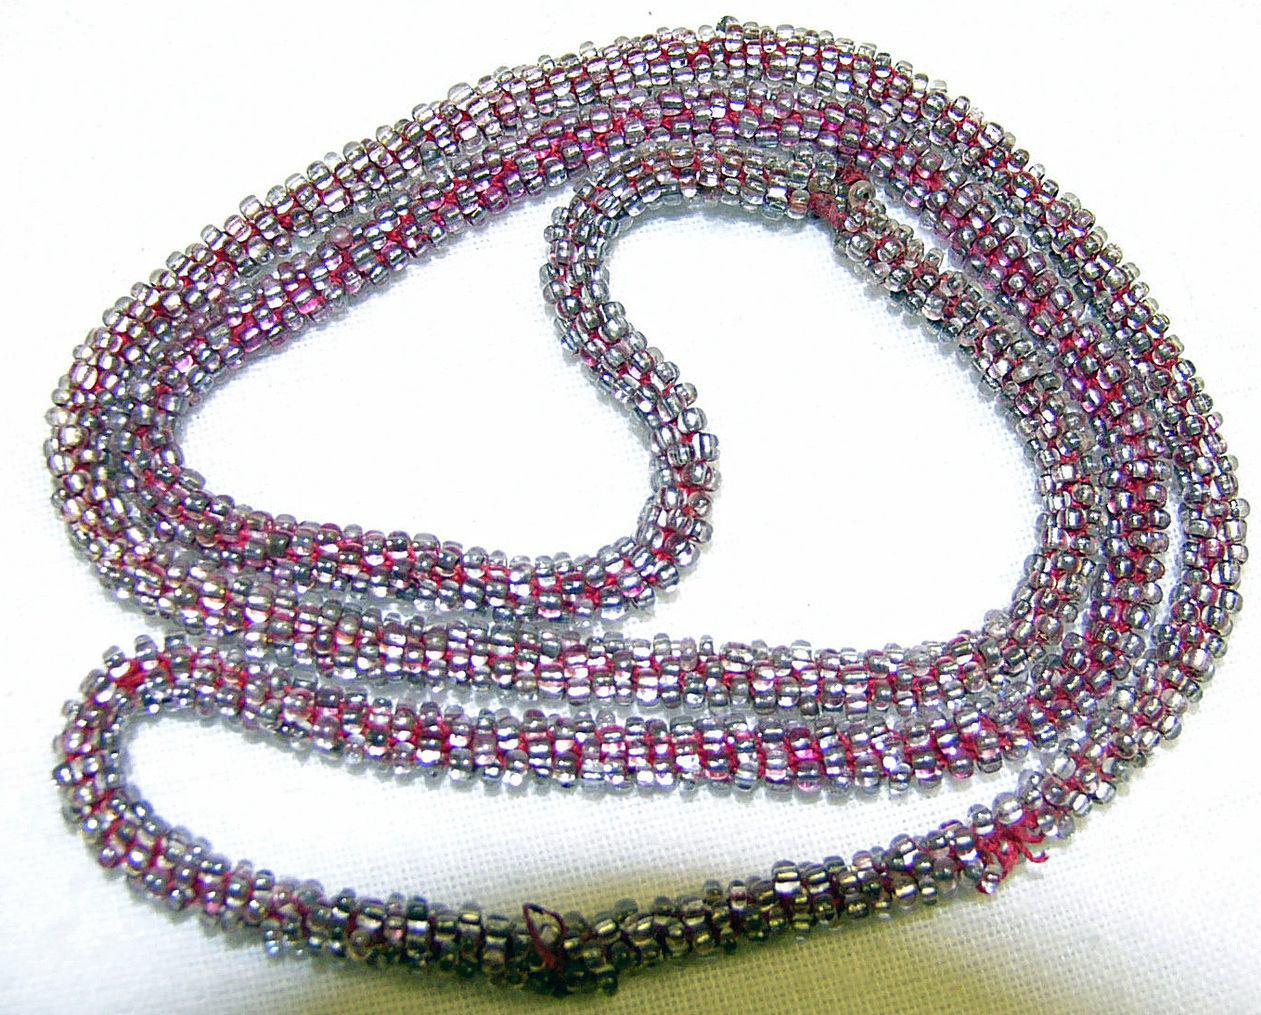 Primary image for Art Deco Vintage Glass Seed Bead Necklace Cord Style 